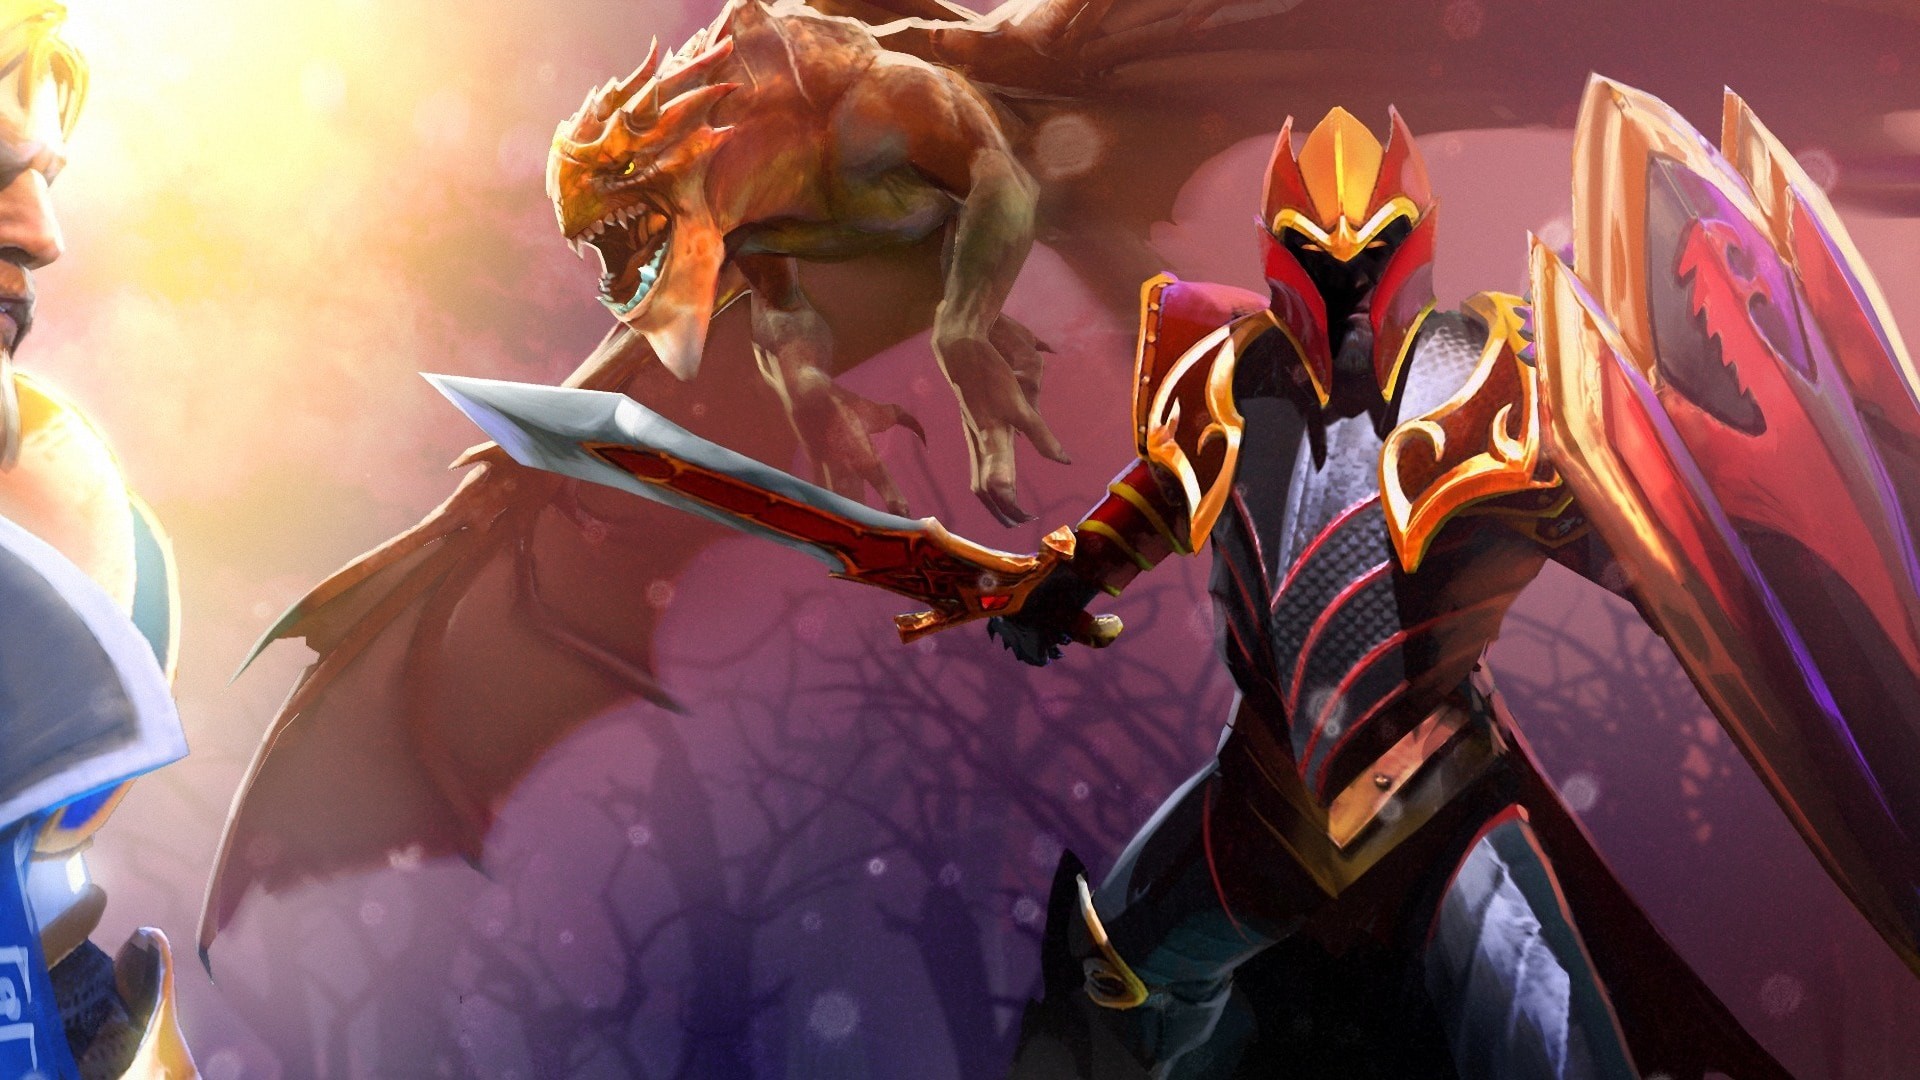 1920x1080 Dota 2 Dragon Knight Wallpapers Images with High Definition Wallpaper   px 344.12 KB